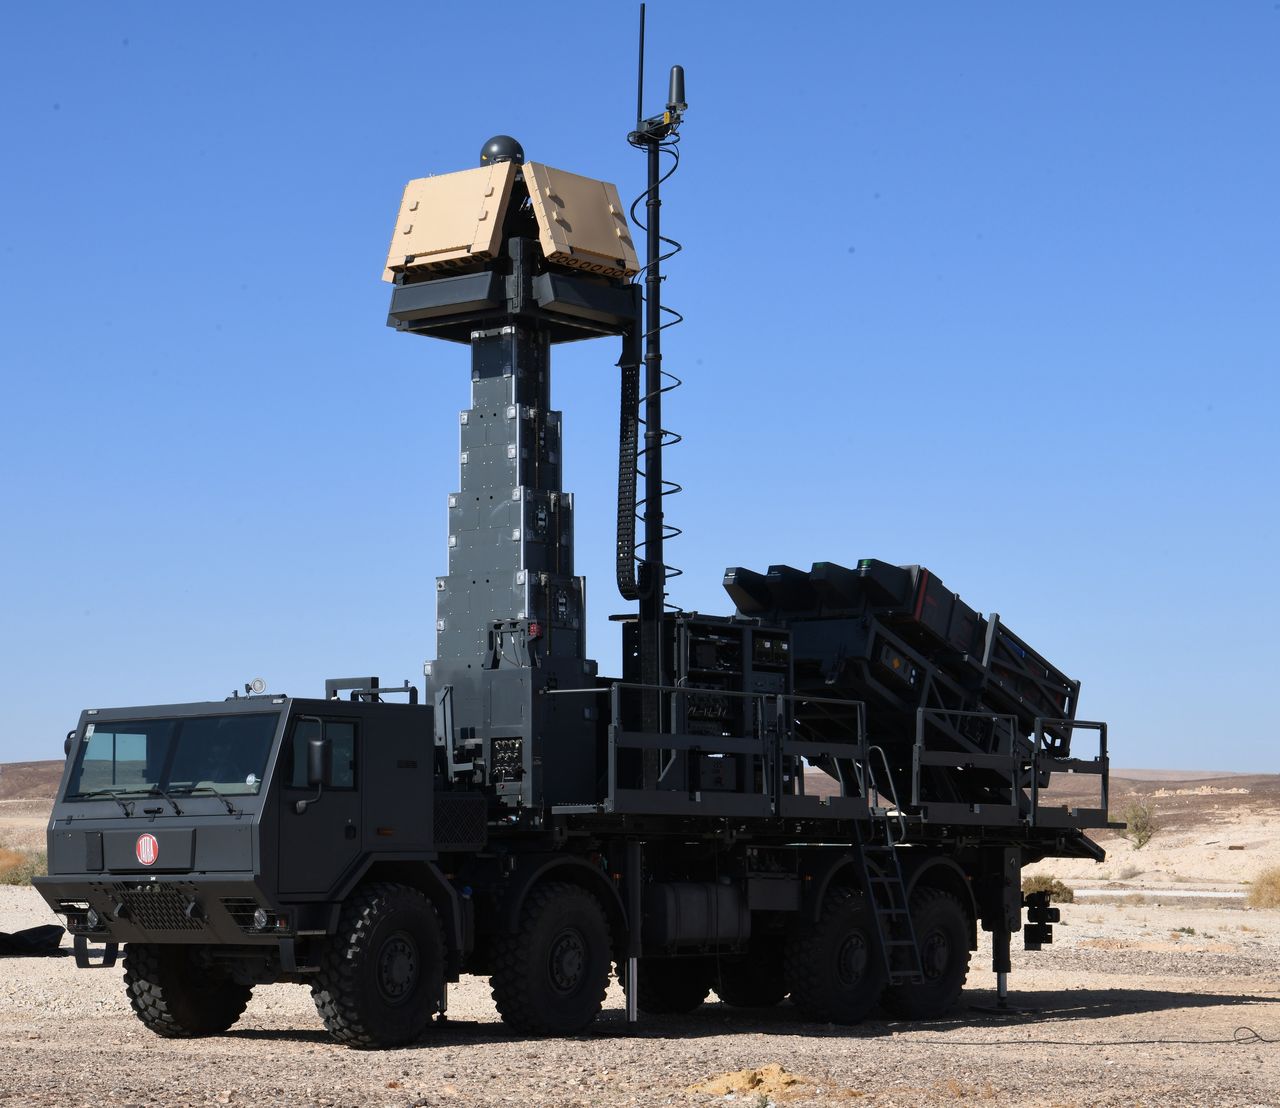 Israeli air defense system scores a direct hit in latest test, further securing its global standing